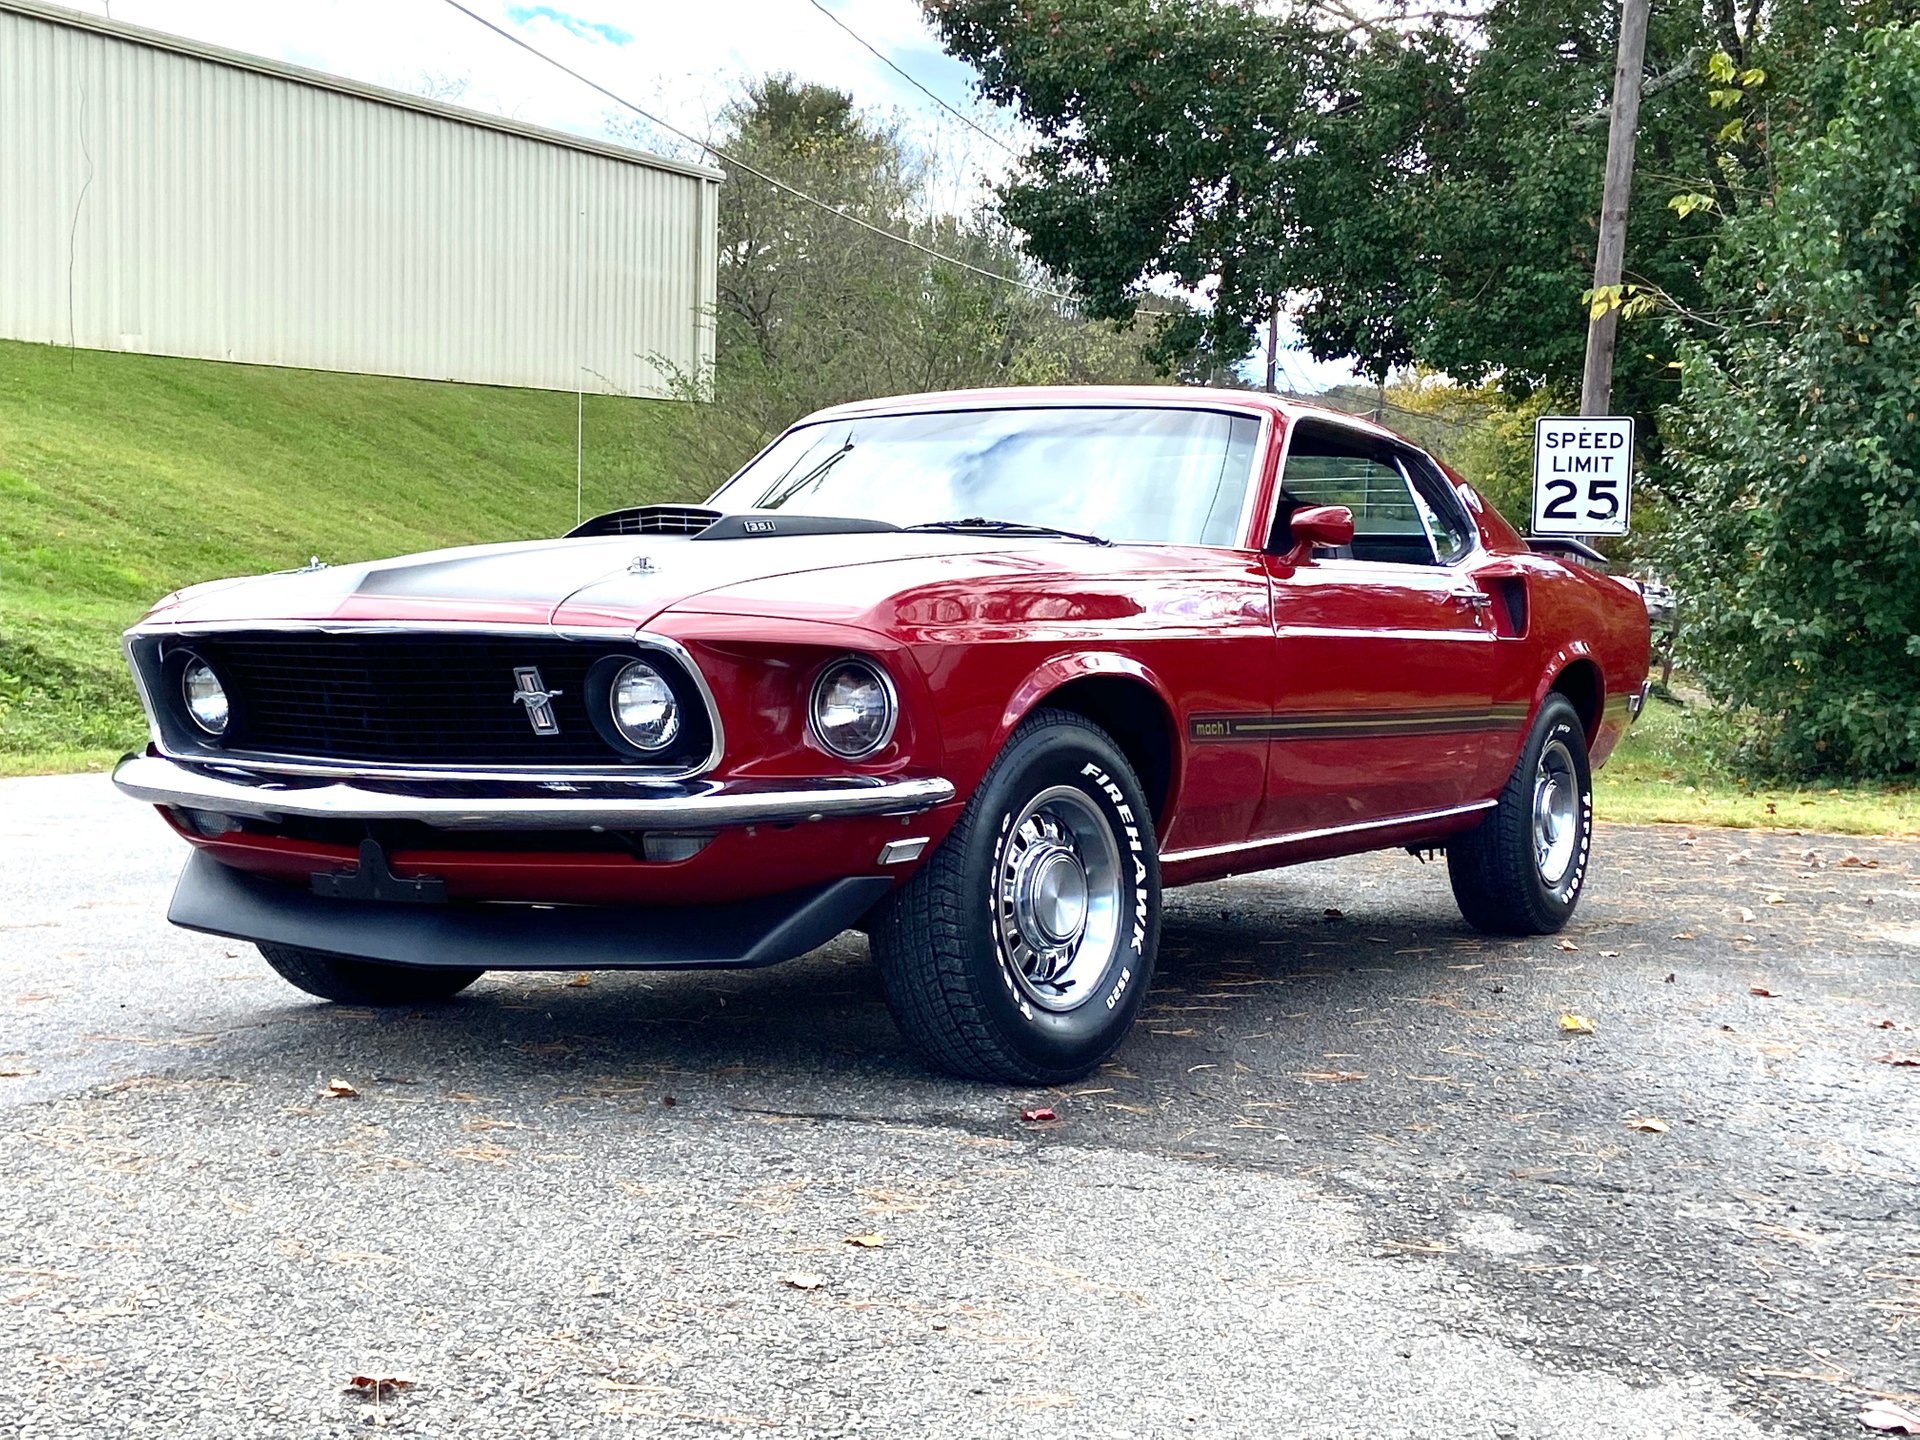 1969 Ford Mustang | GAA Classic Cars